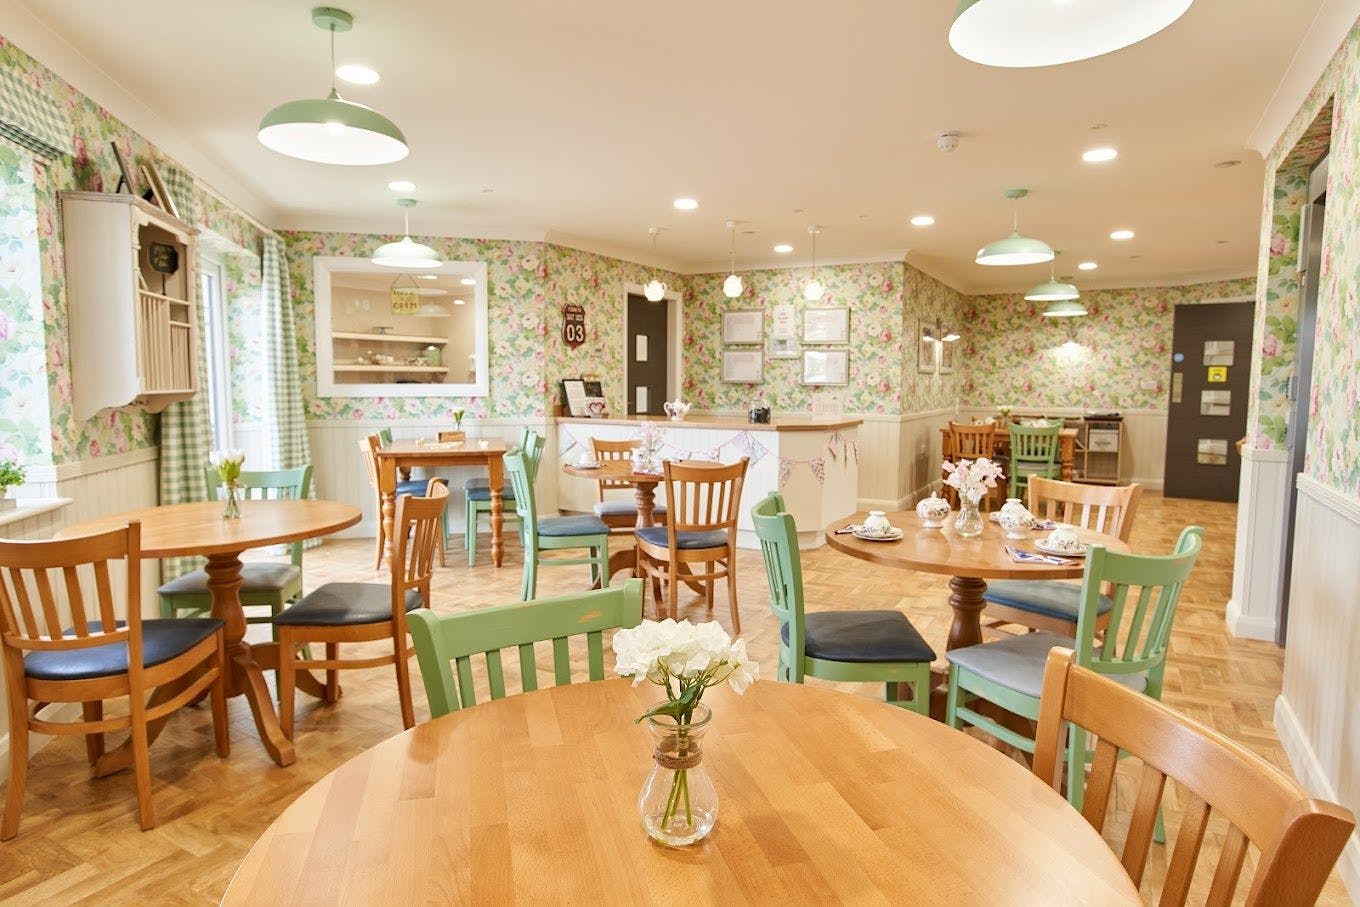 Dining area of Nodens Manor care home in Lydney, Gloucestershire